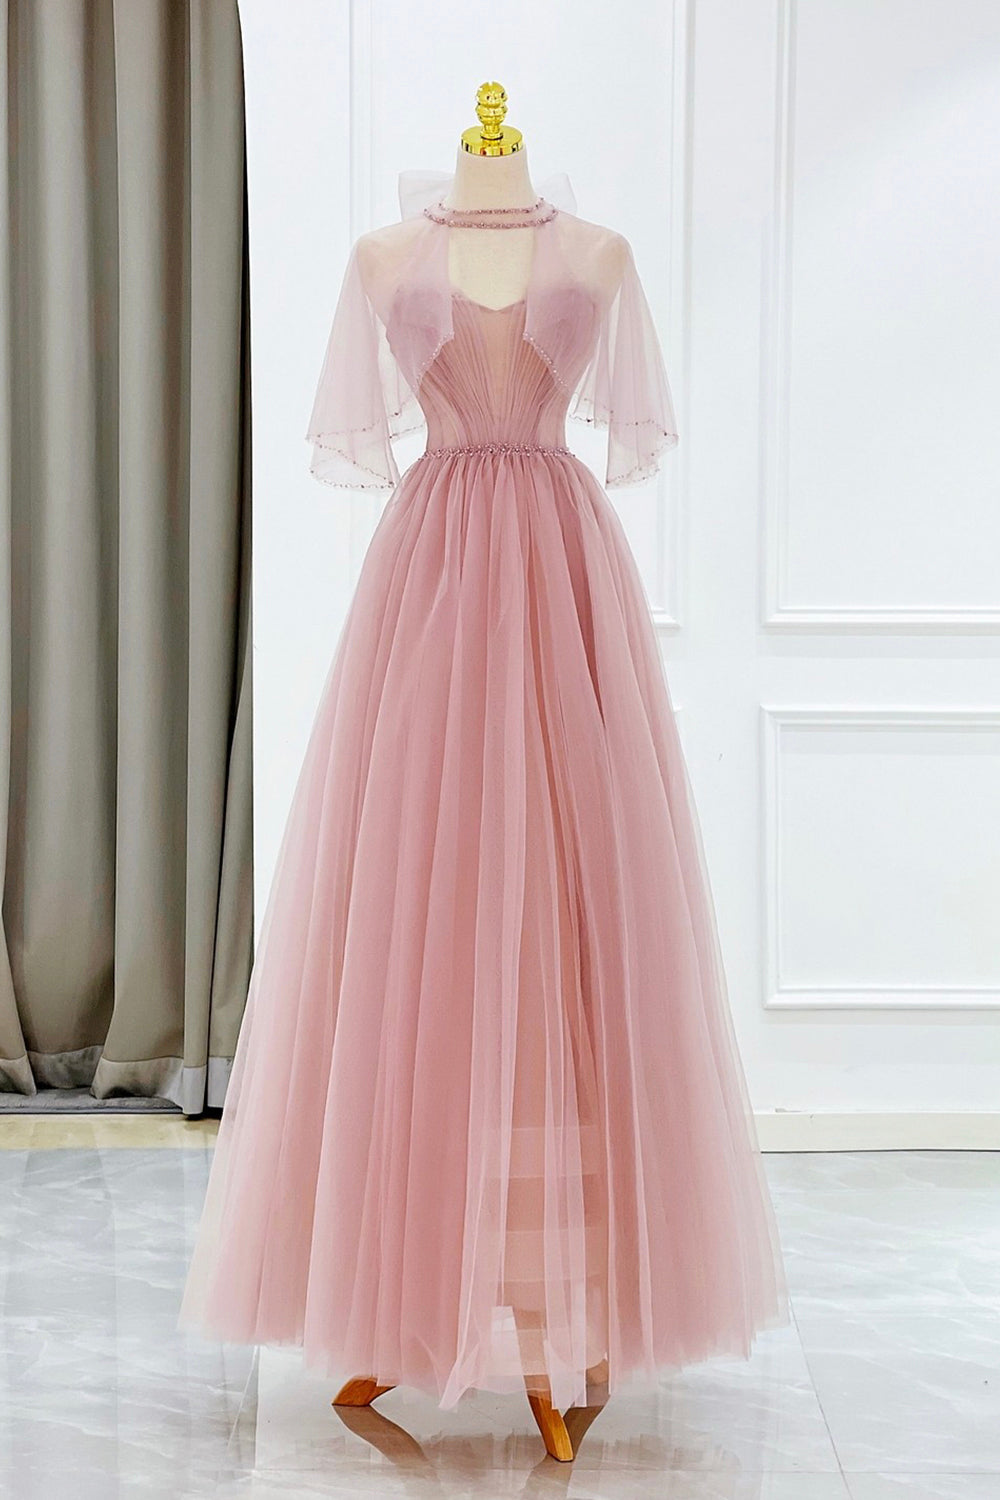 Pink Tulle Beaded Long Prom Dress, Lovely Pink Evening Dress